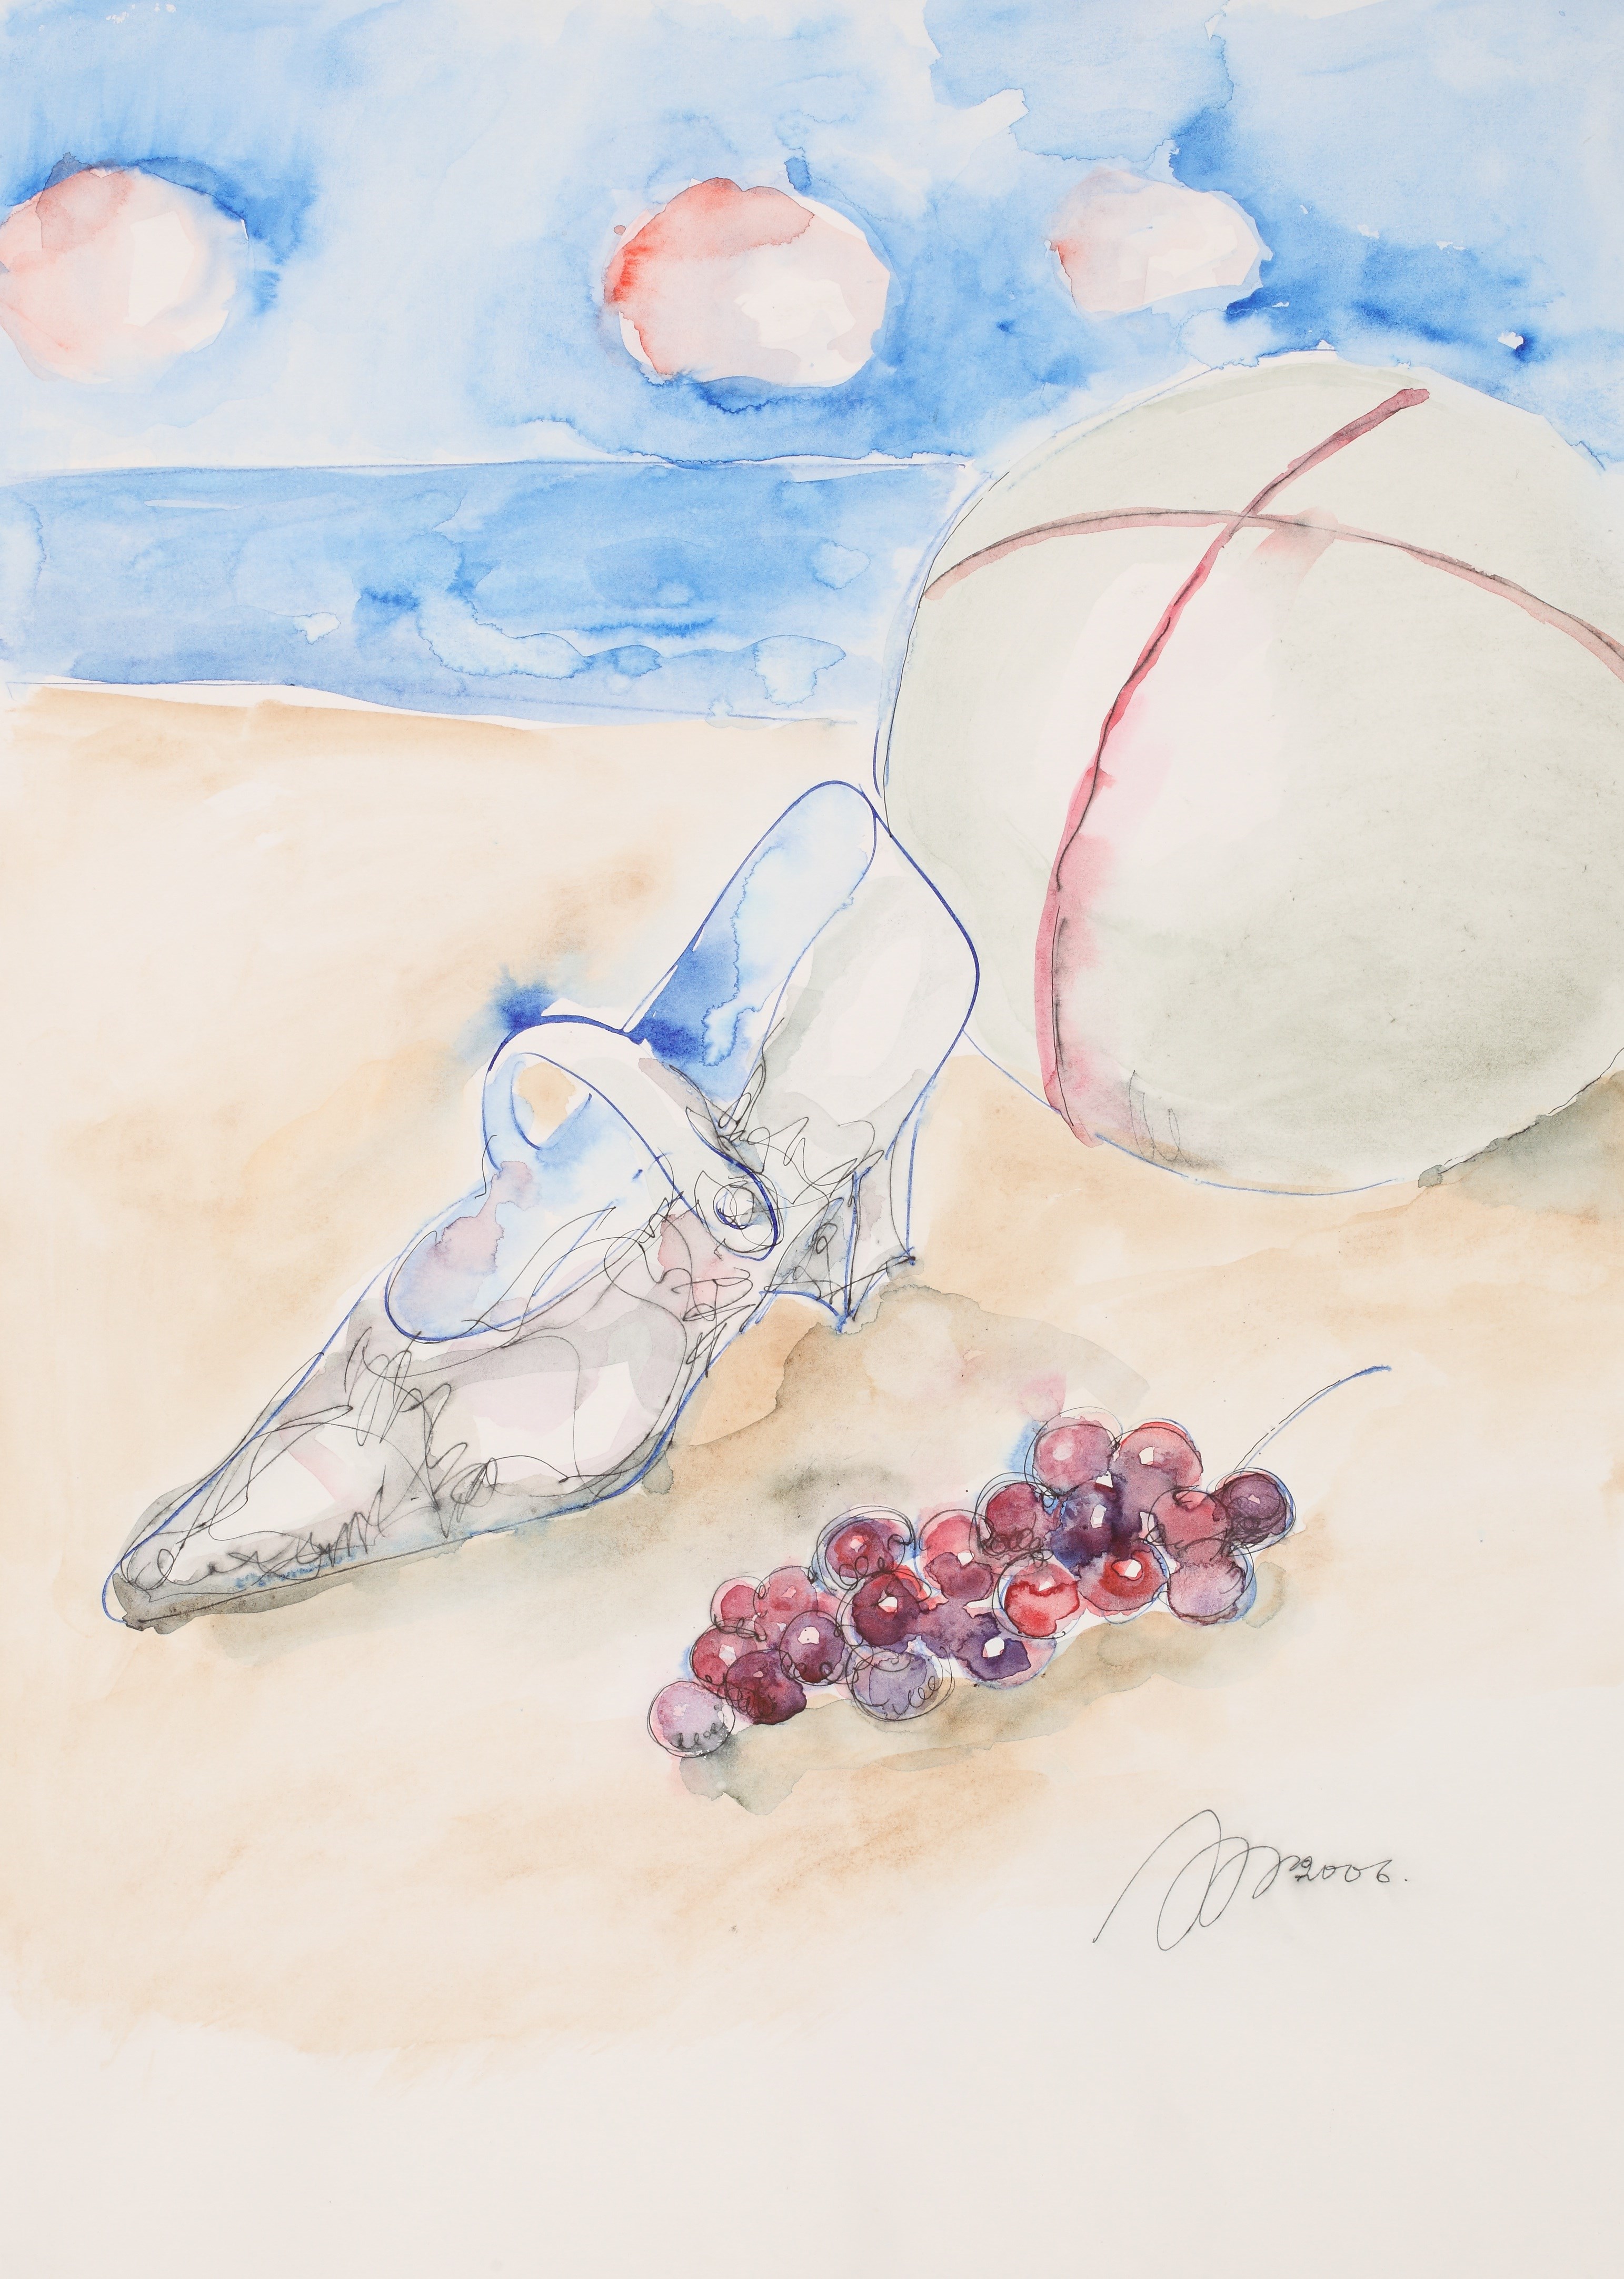 Shoe with grapes